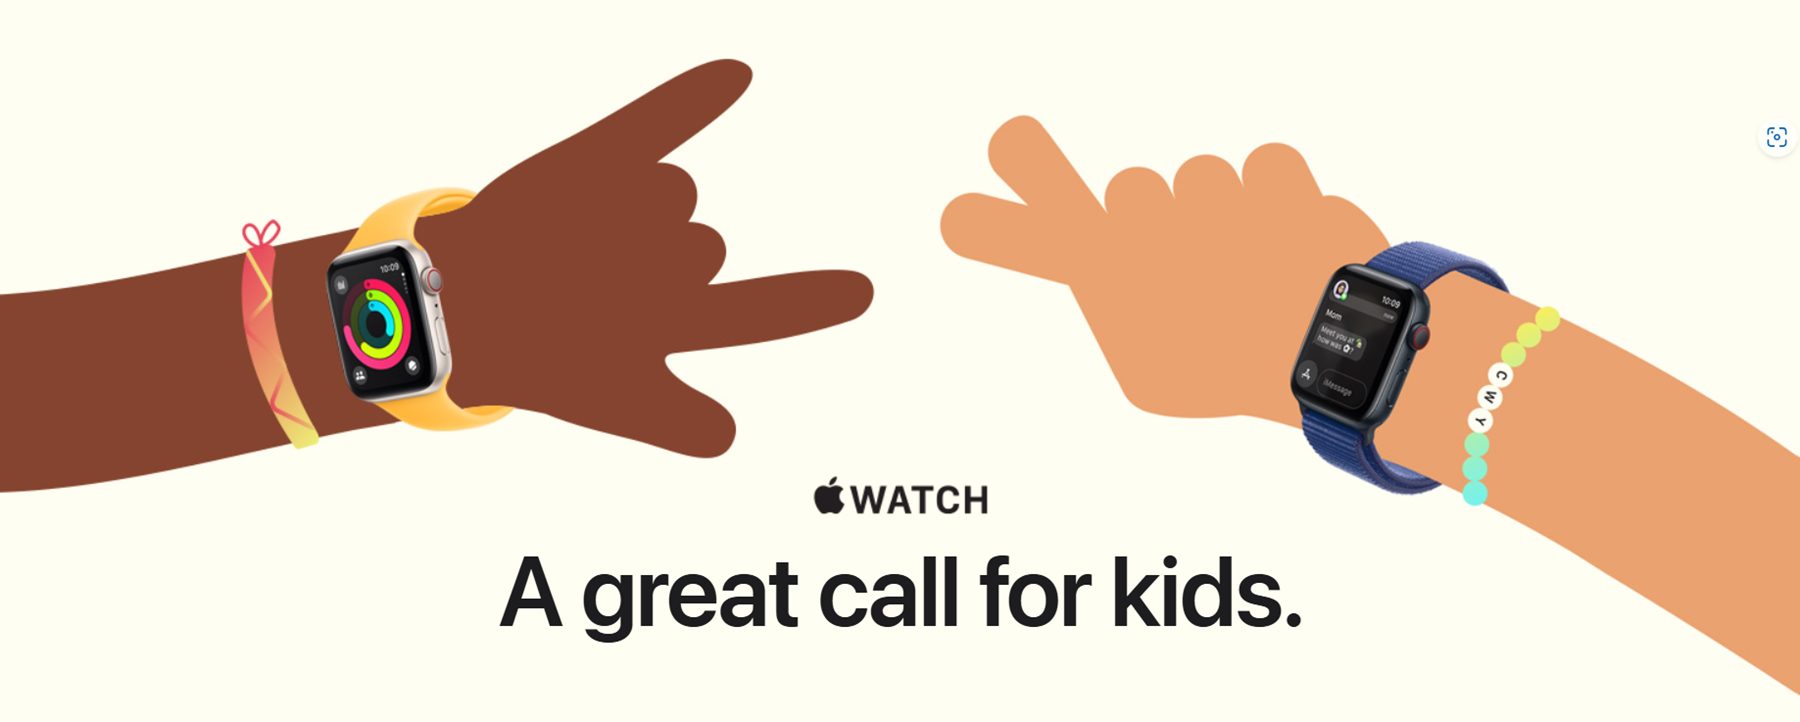 Apple Watch for Kids Released in India